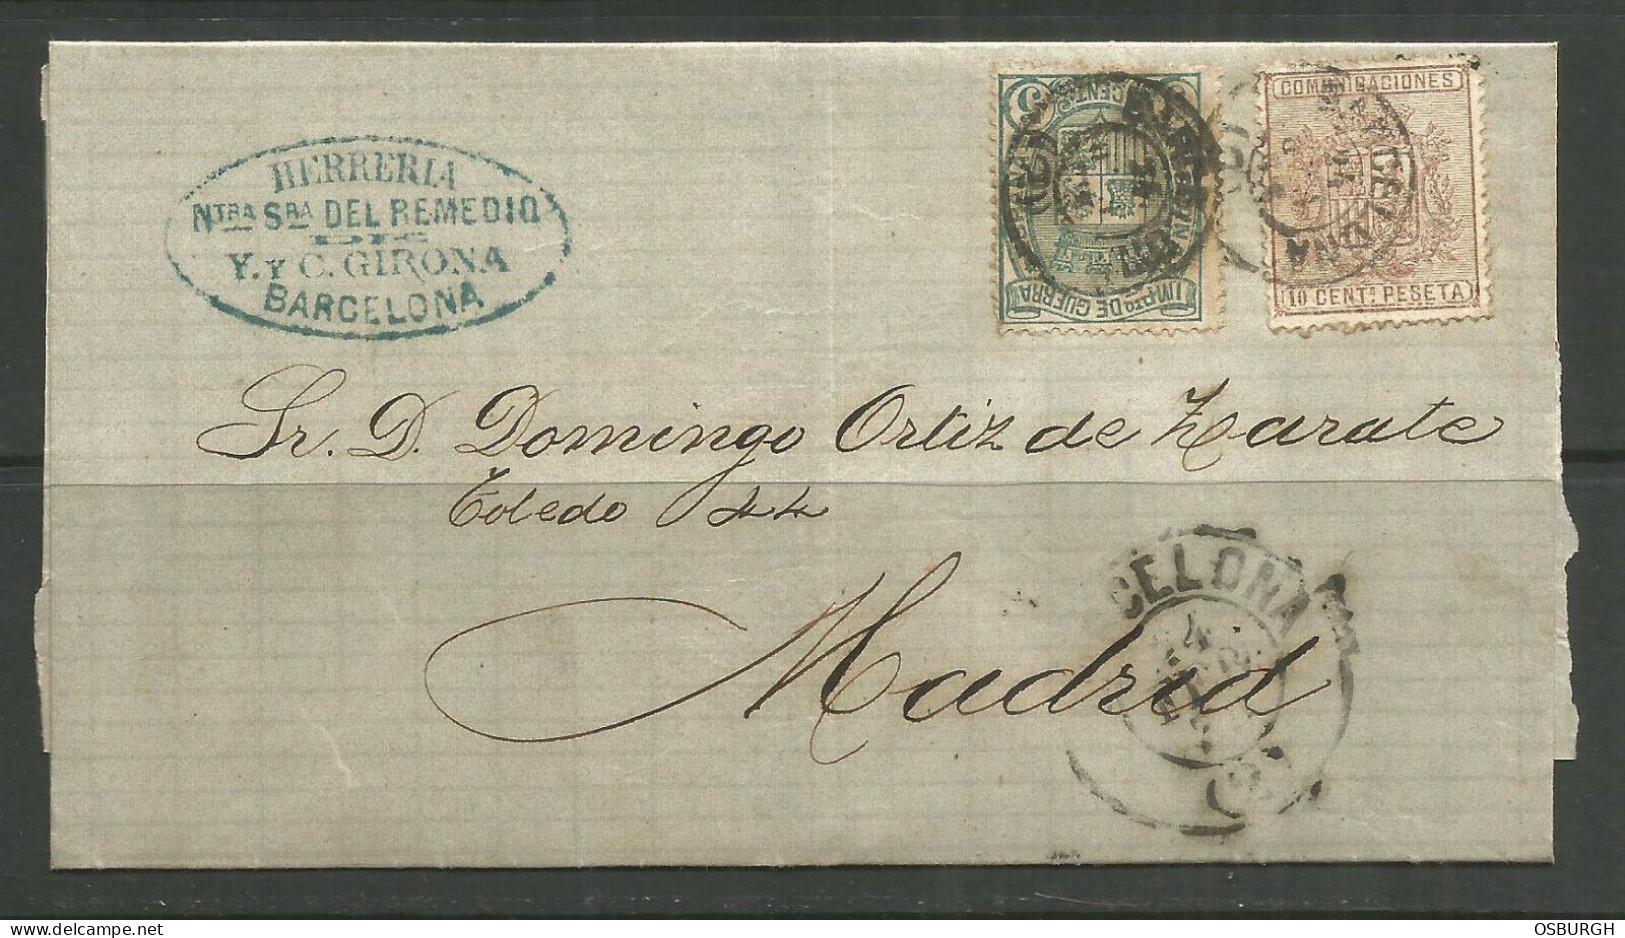 SPAIN. FOLDED COVER. BARCELONA TO MADRID. C GIRONA. - Covers & Documents